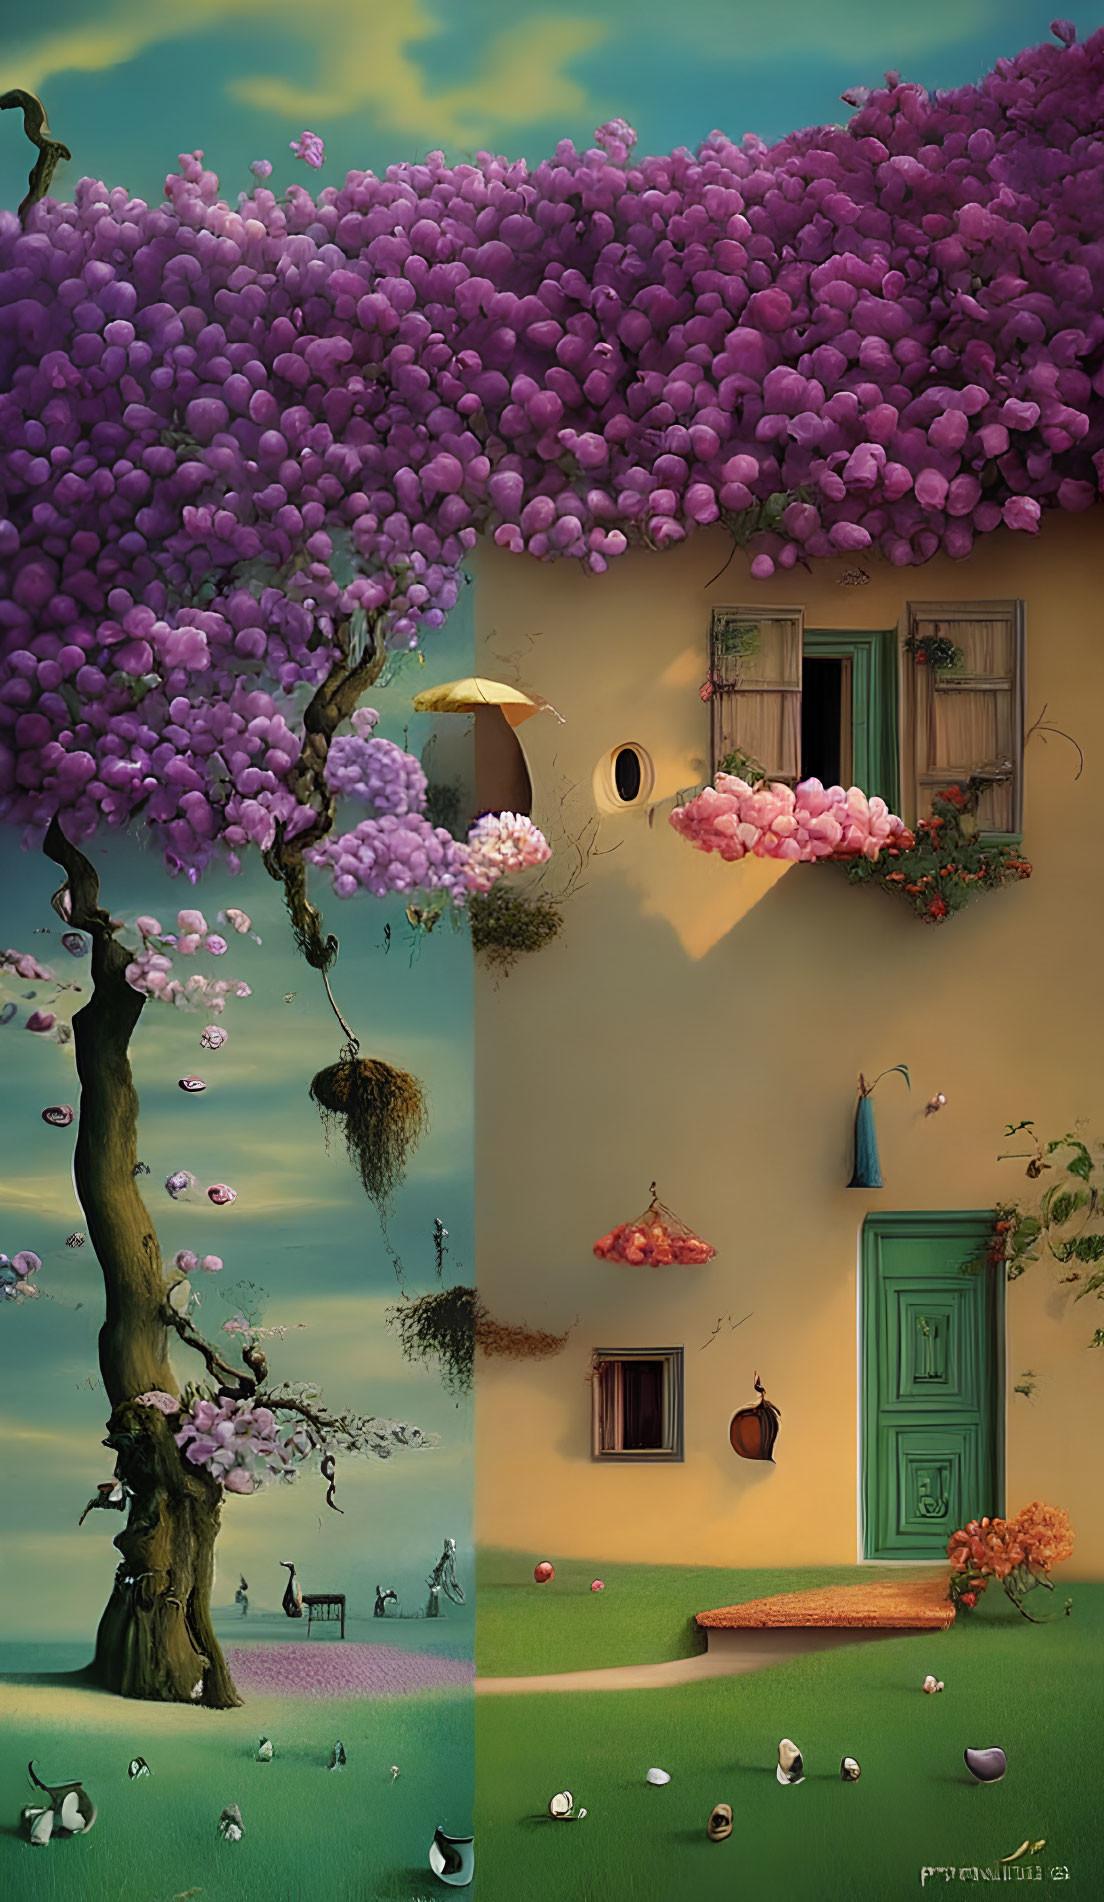 Whimsical artwork of tree with purple blooms and charming house